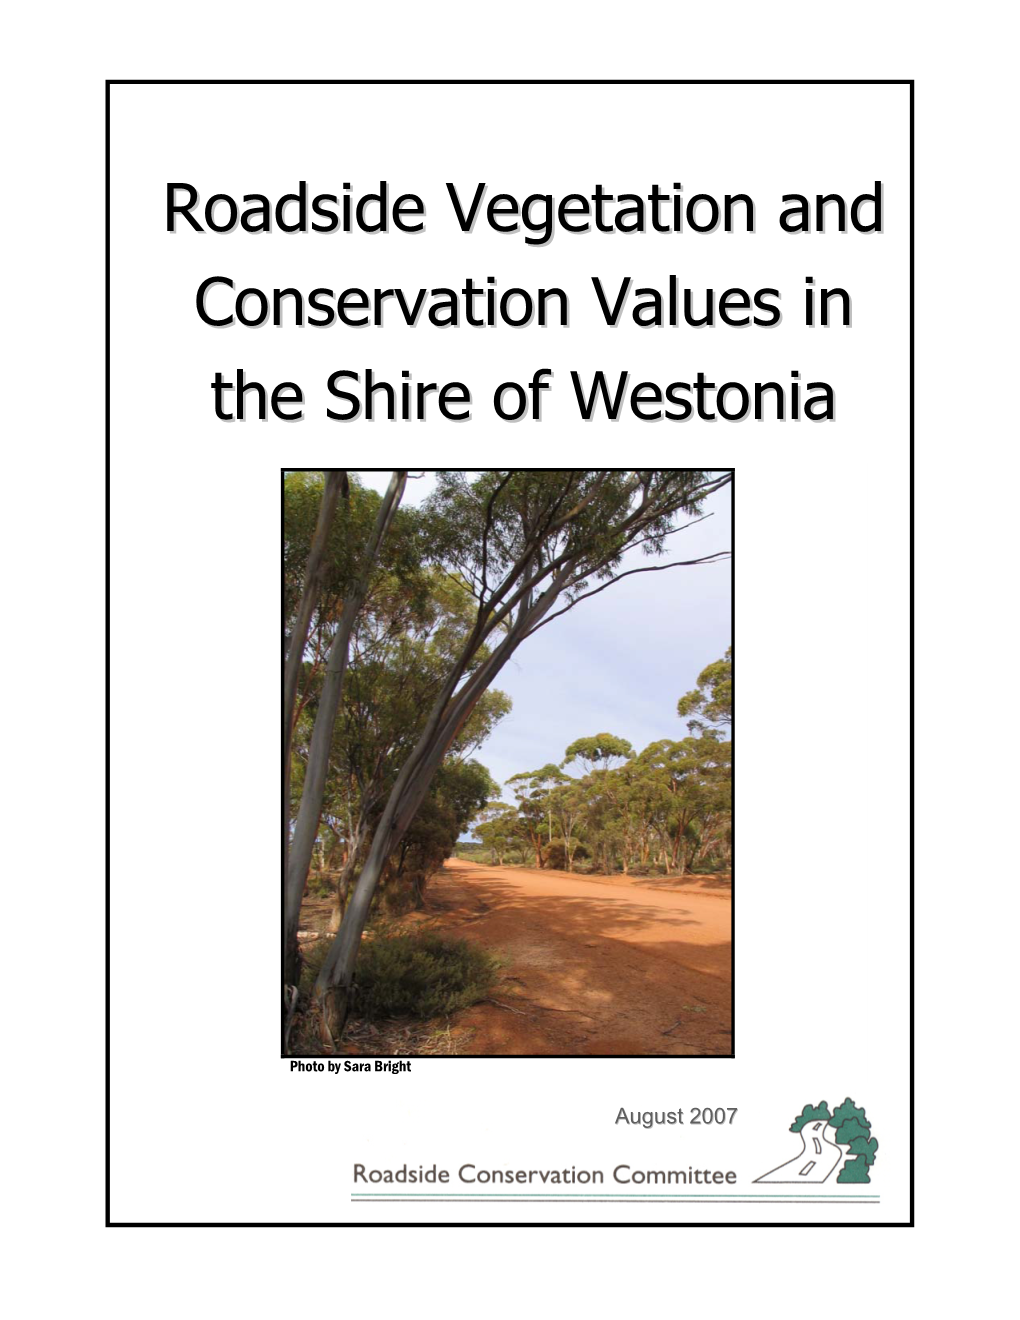 Roadside Vegetation and Conservation Values in the Shire Of